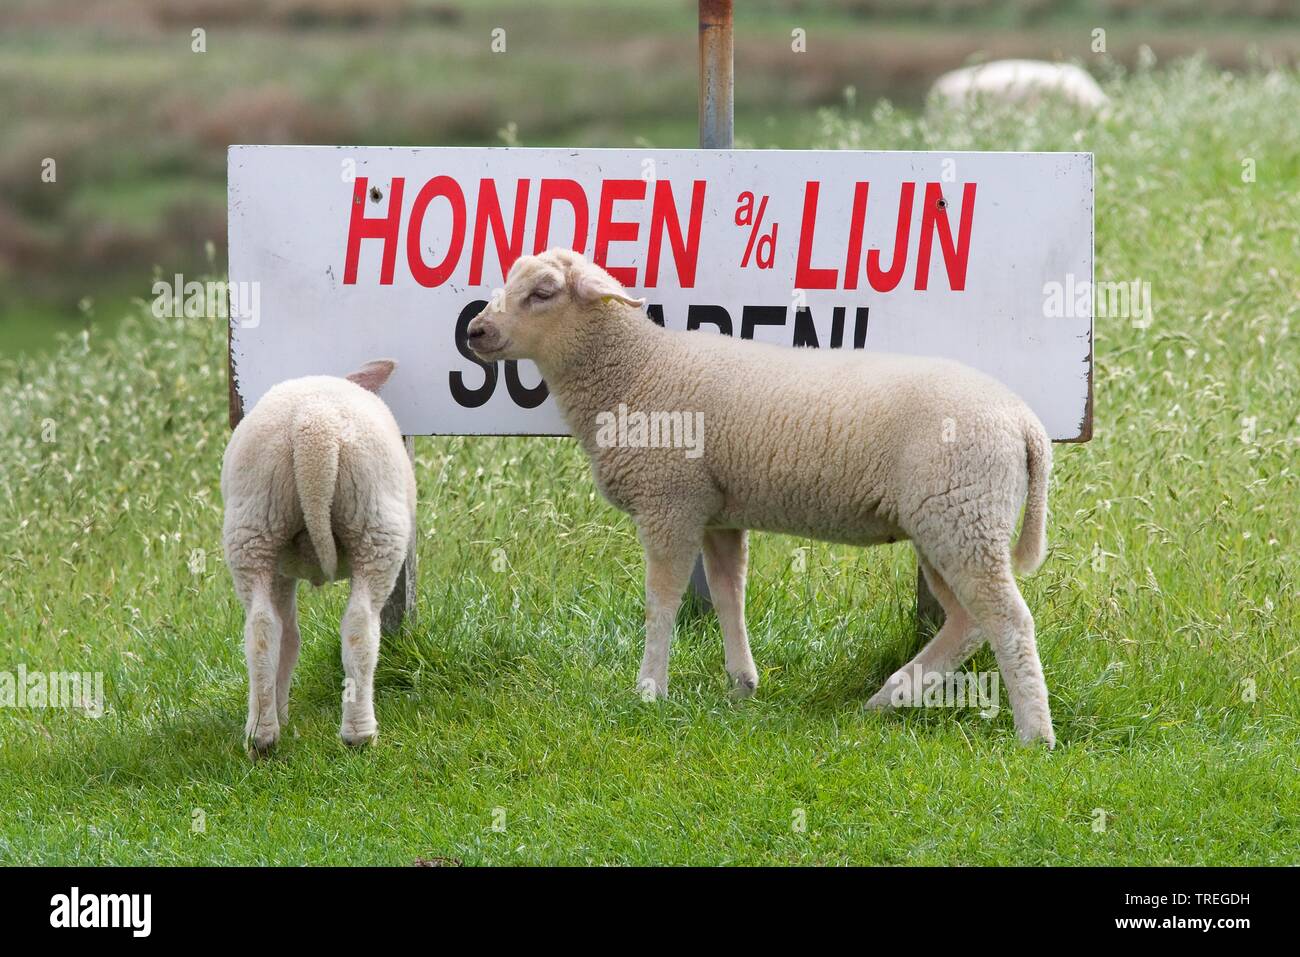 domestic sheep (Ovis ammon f. aries), two sheep at a sign Schild 'Honden a/d Lijn - please keep dogs on a leash', Netherlands, Schiermonnikoog Stock Photo